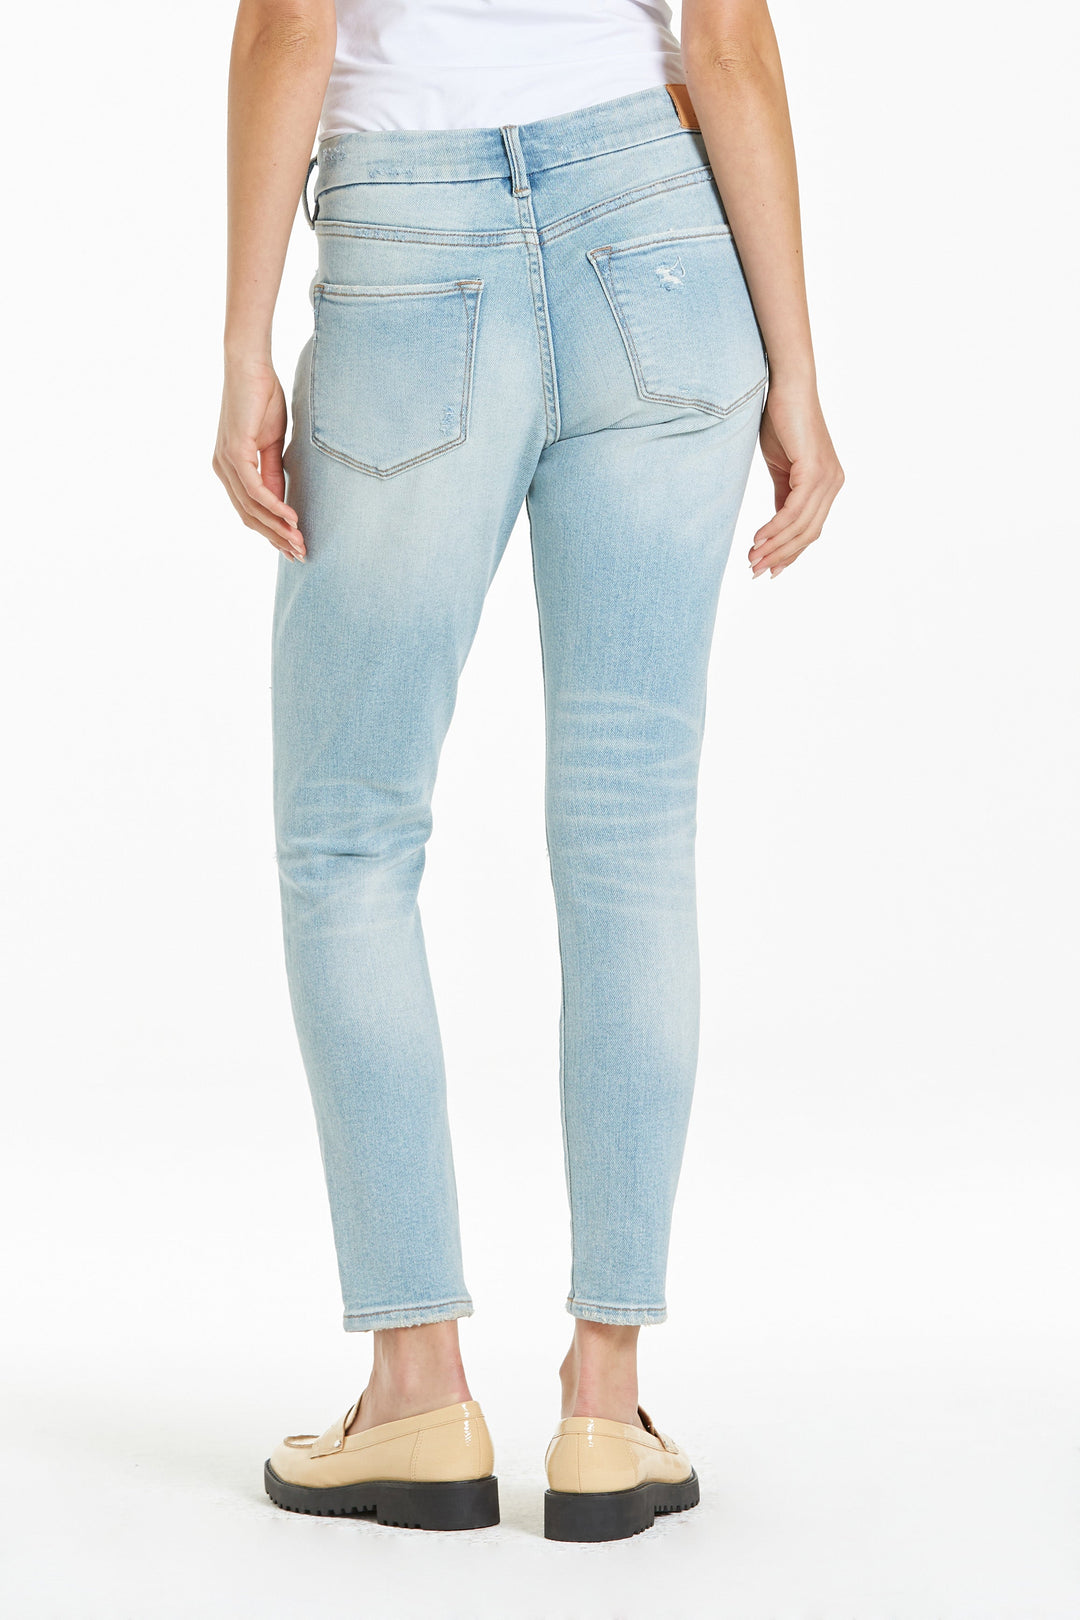 image of a female model wearing a JOYRICH MID RISE ANKLE SKINNY JEANS BELLE ISLE JEANS